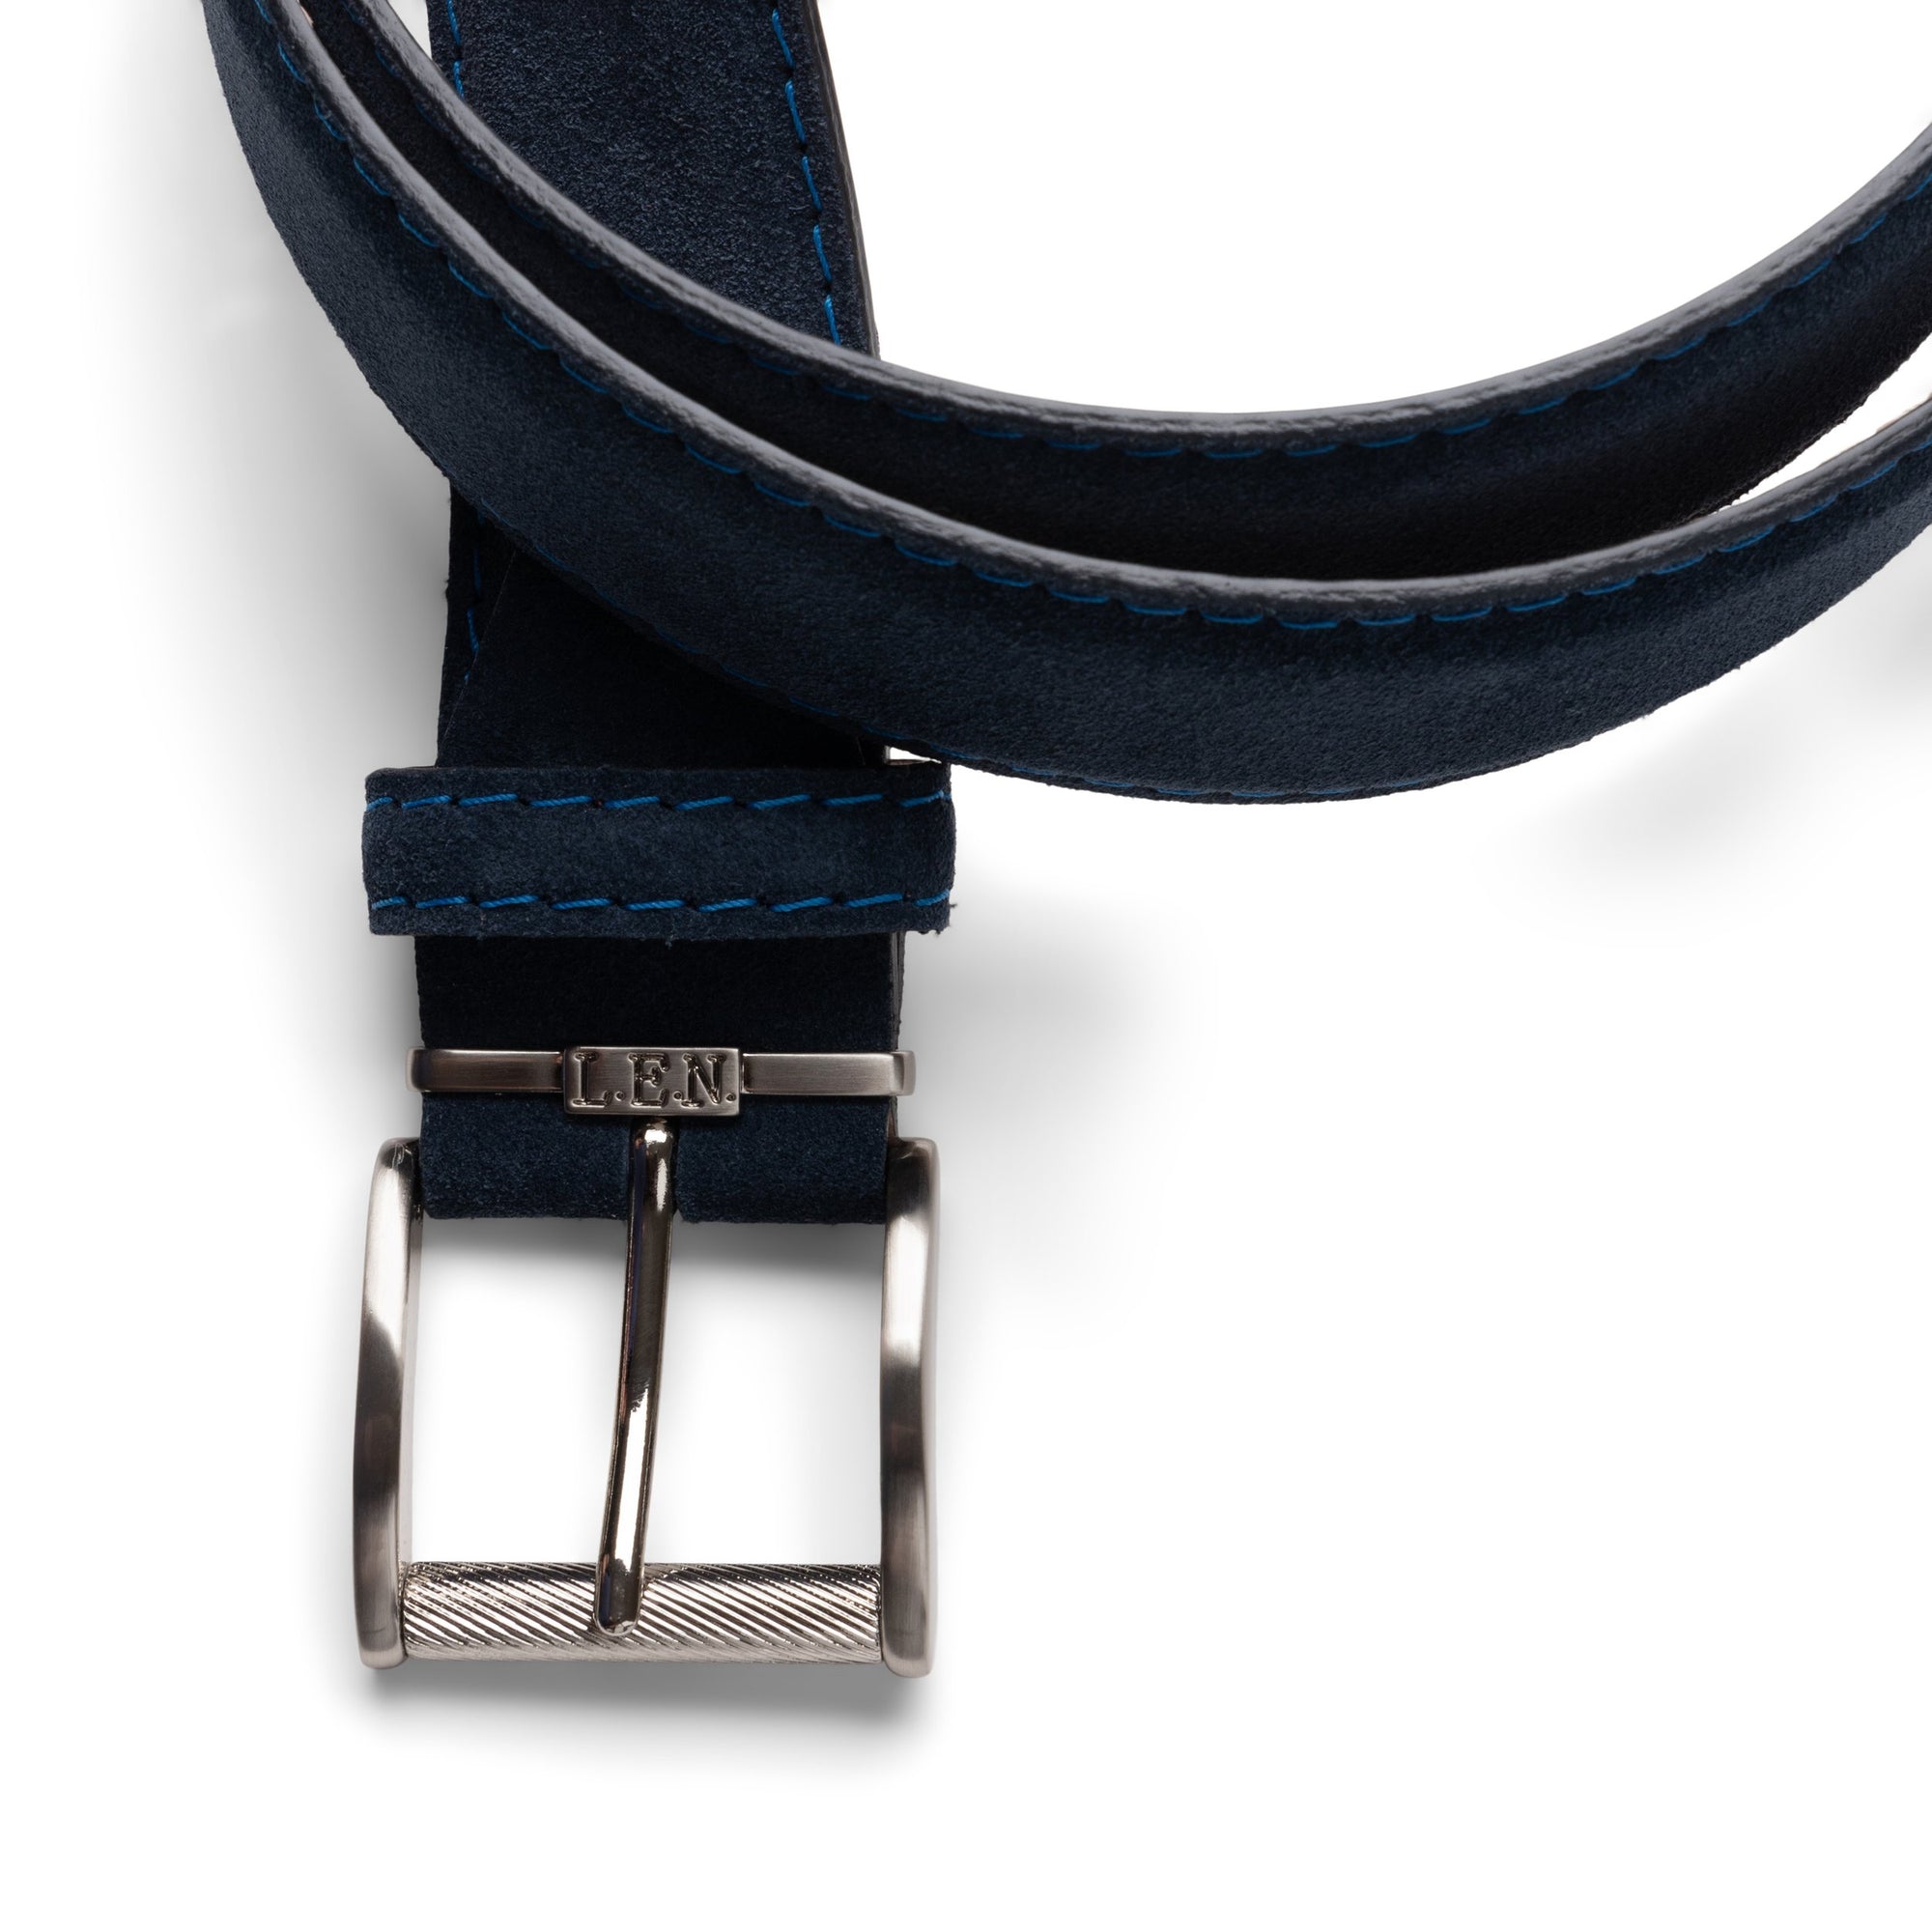 Italian Suede Belt in Navy Blue with Denim Blue Stitching by L.E.N. Bespoke